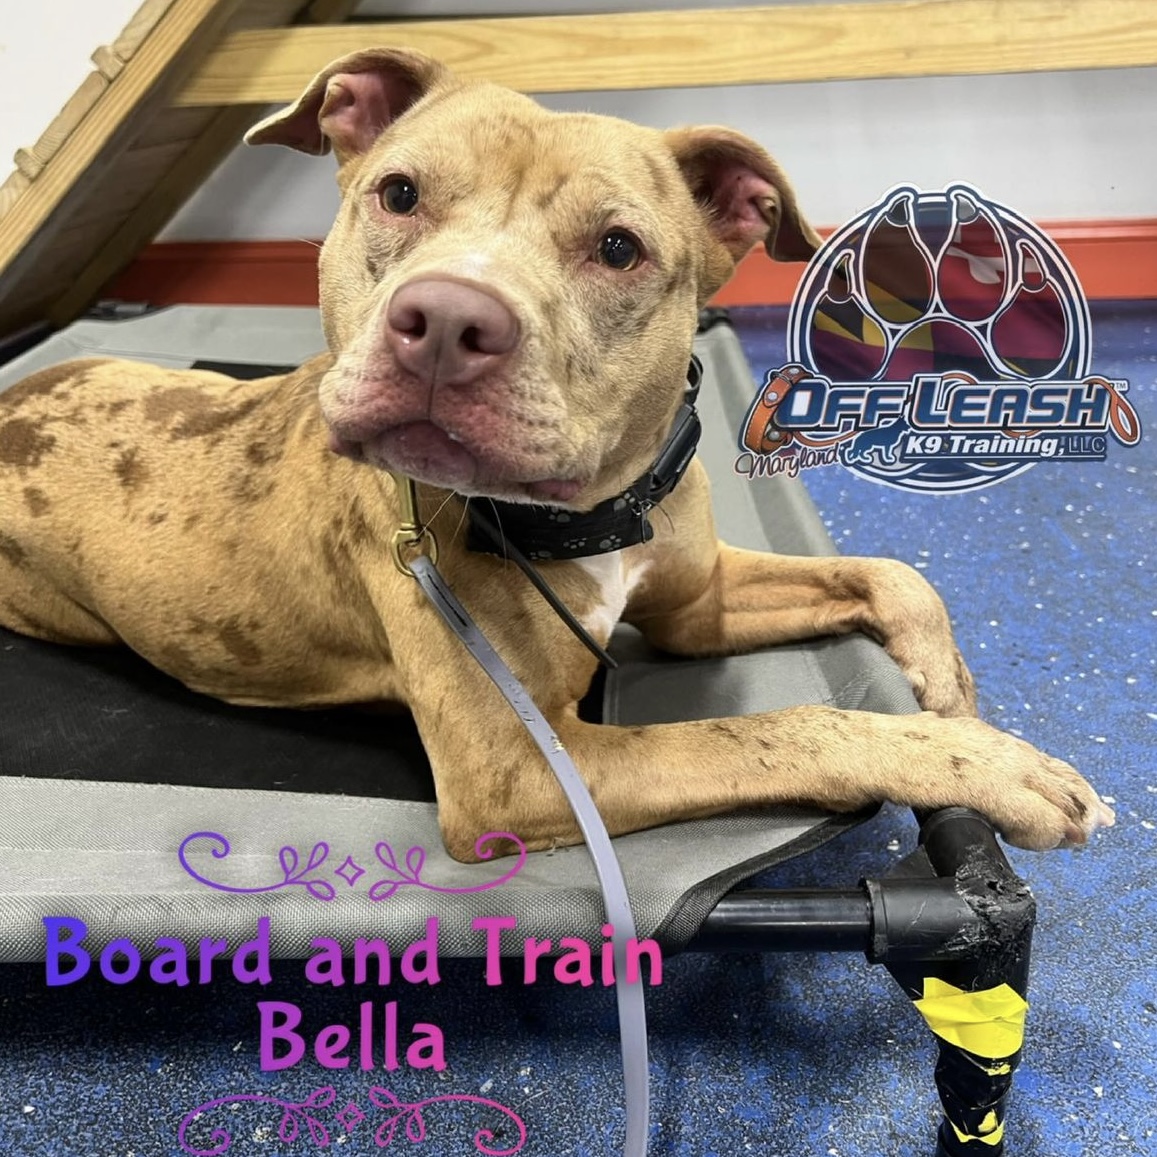 Dog named Bella who participated in our 2 week board and train program in Maryland